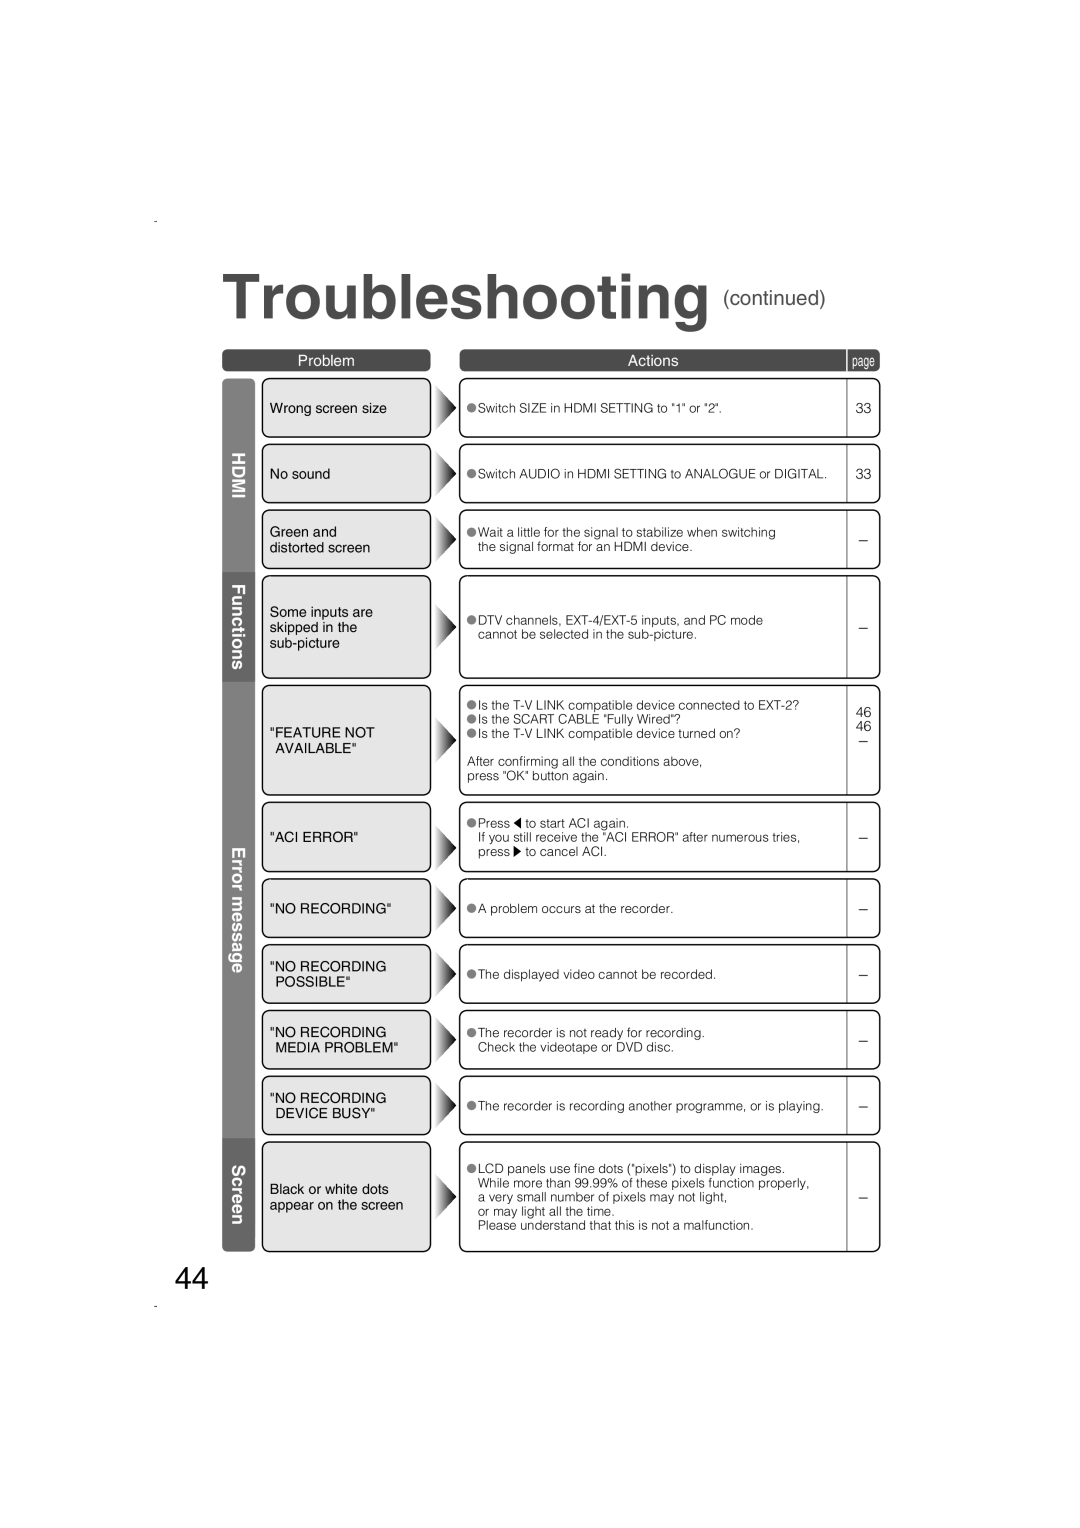 JVC LCT1847-001B-U manual Troubleshooting continued, Error, Functions, Problem, Actions, page, Screen 